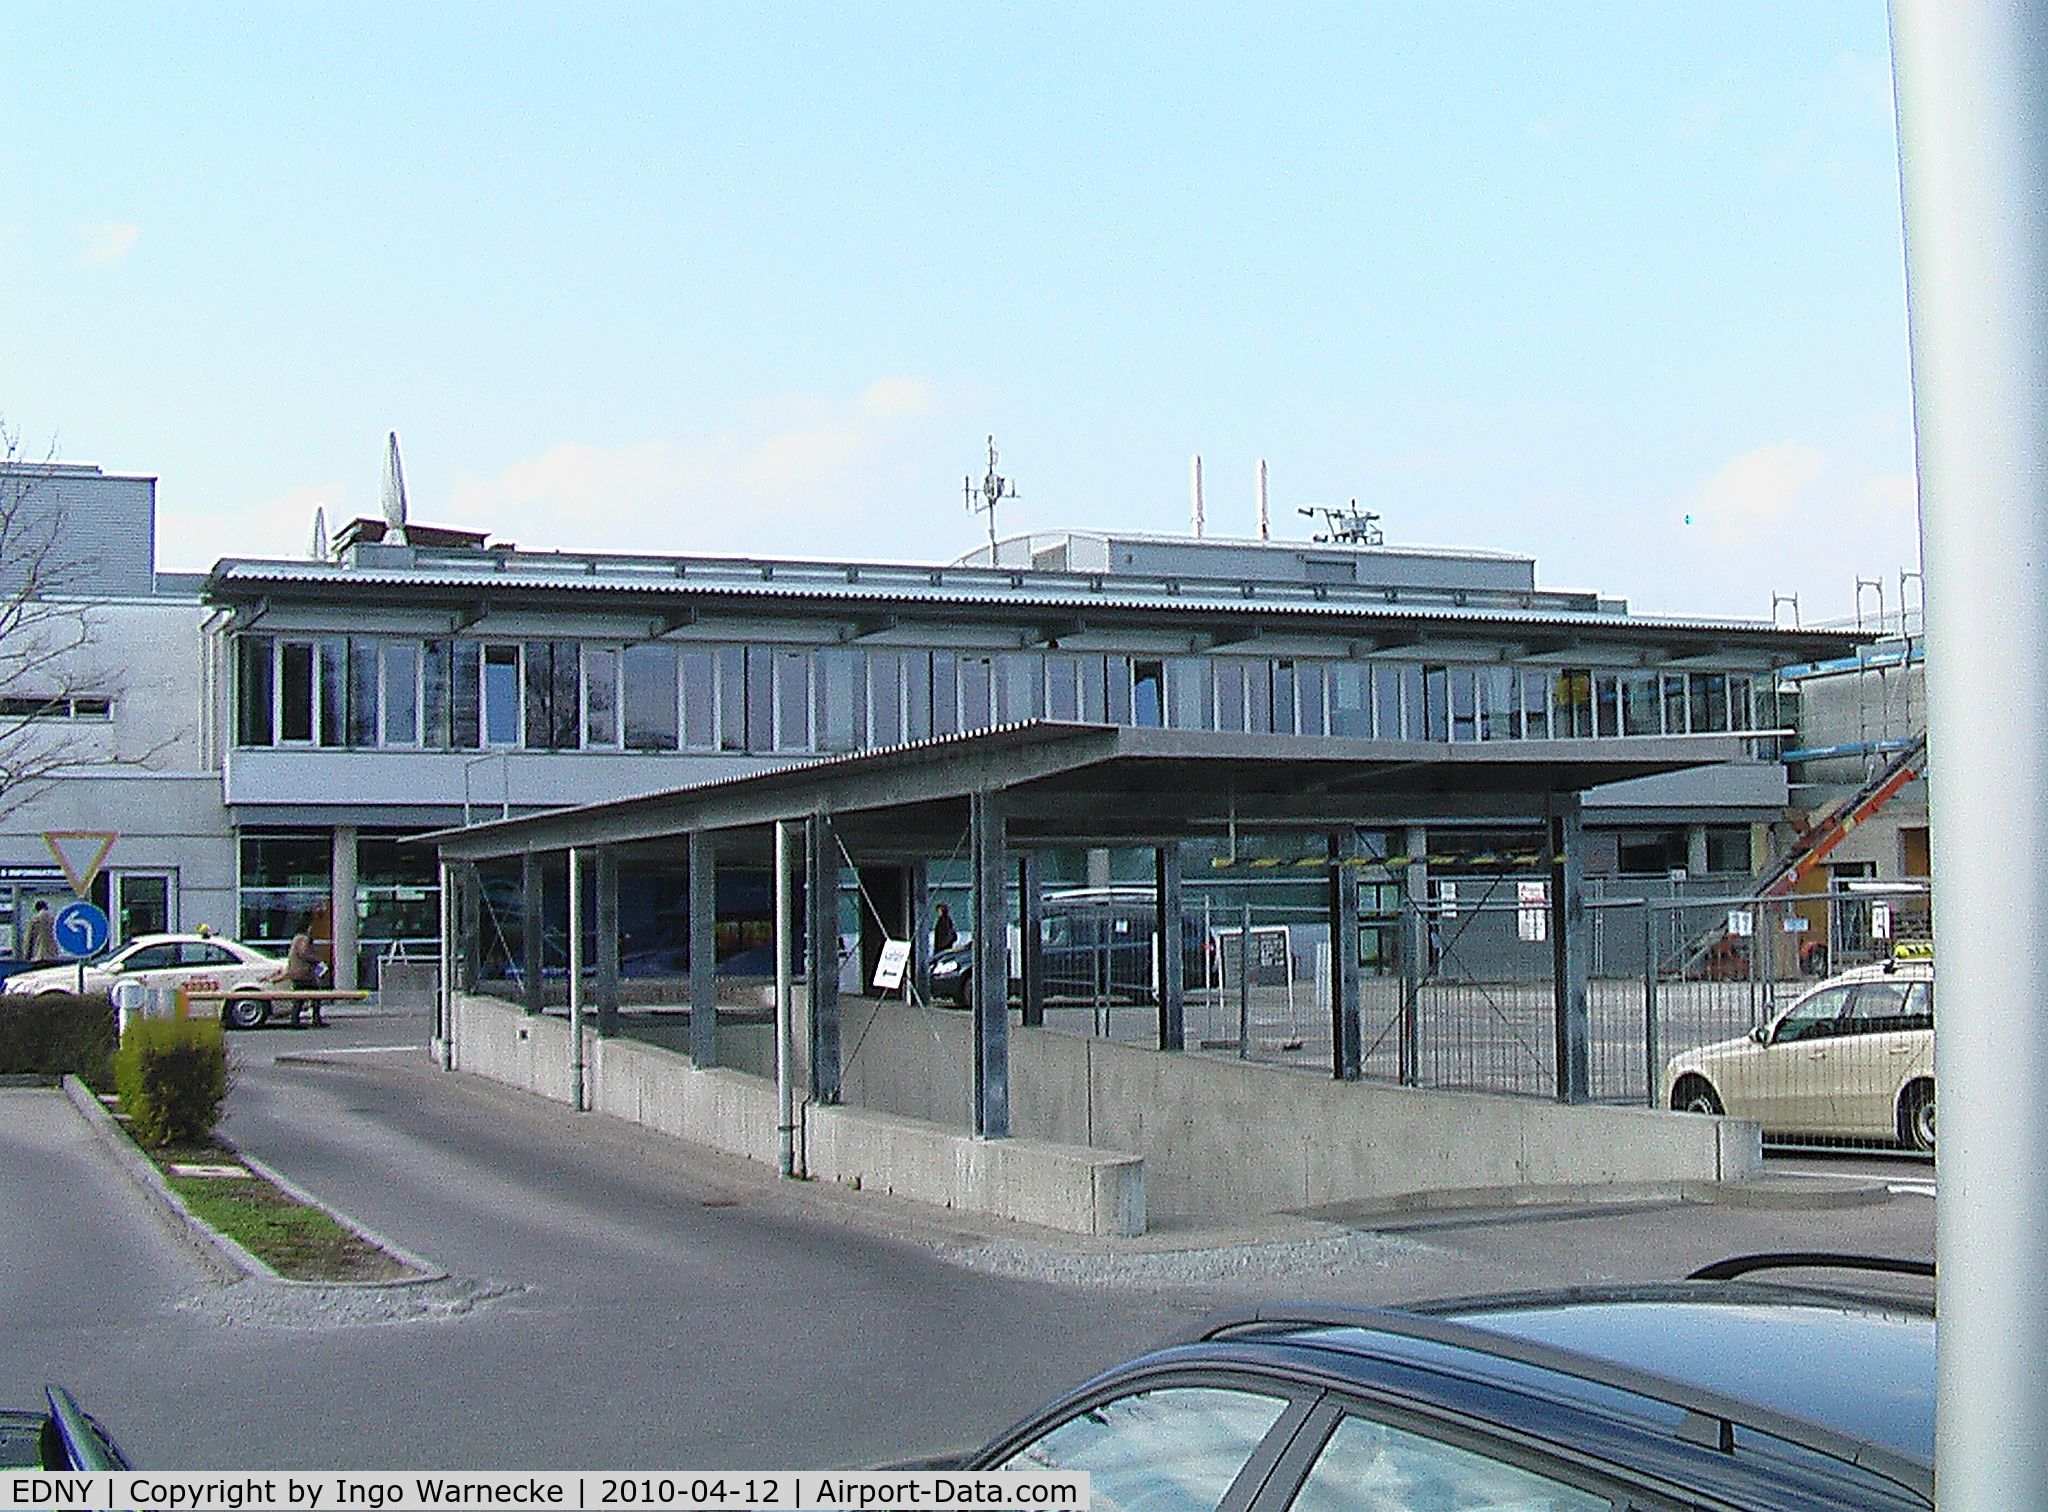 Bodensee Airport, Friedrichshafen Germany (EDNY) - the new terminal (streetside)